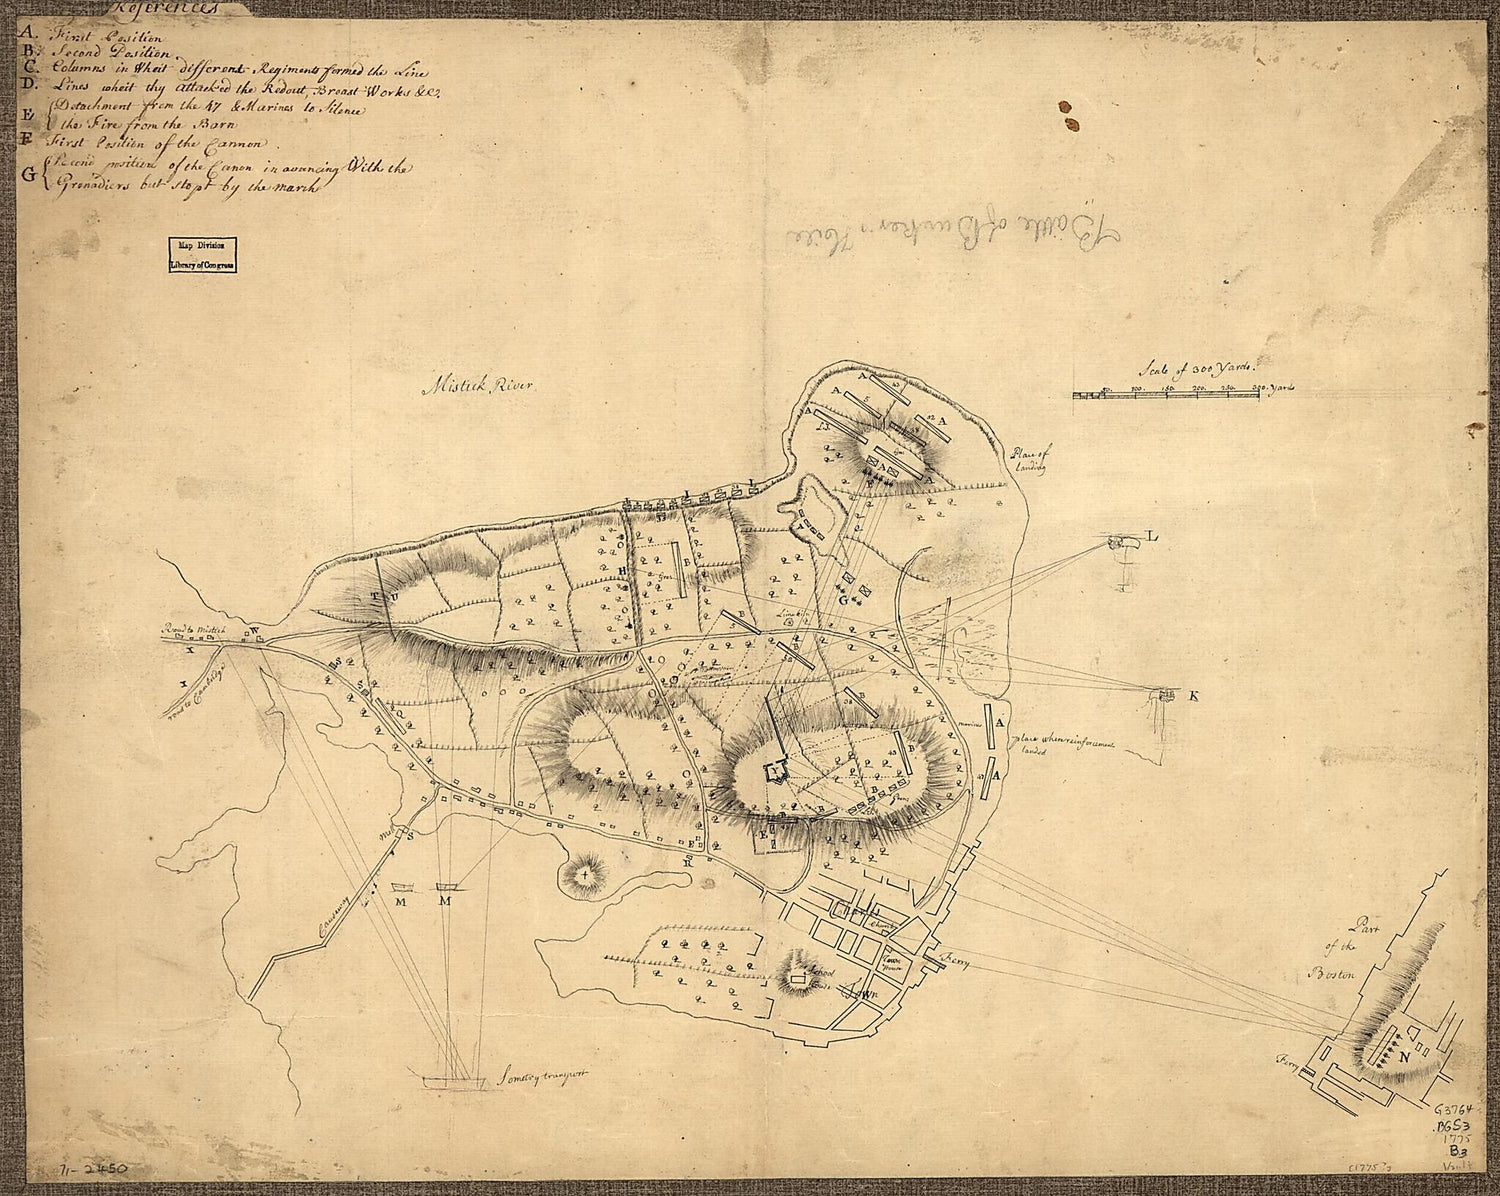 This old map of Battle of Bunker Hill from 1775 was created by  in 1775